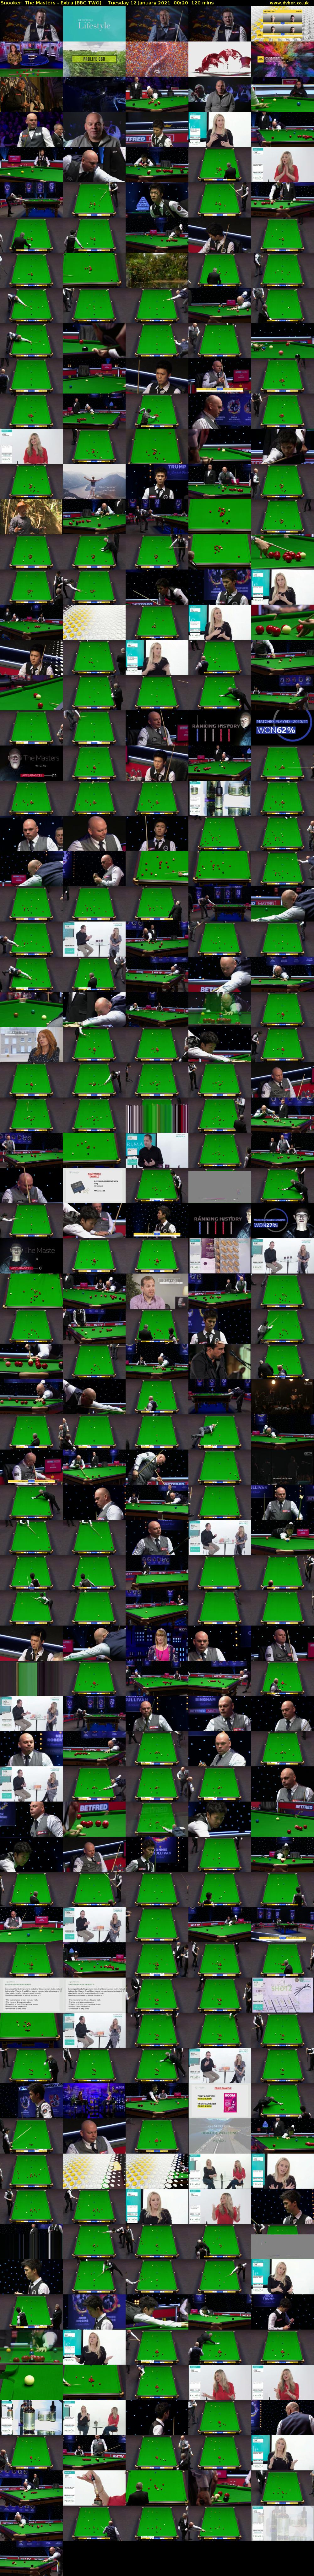 Snooker: The Masters - Extra (BBC TWO) Tuesday 12 January 2021 00:20 - 02:20